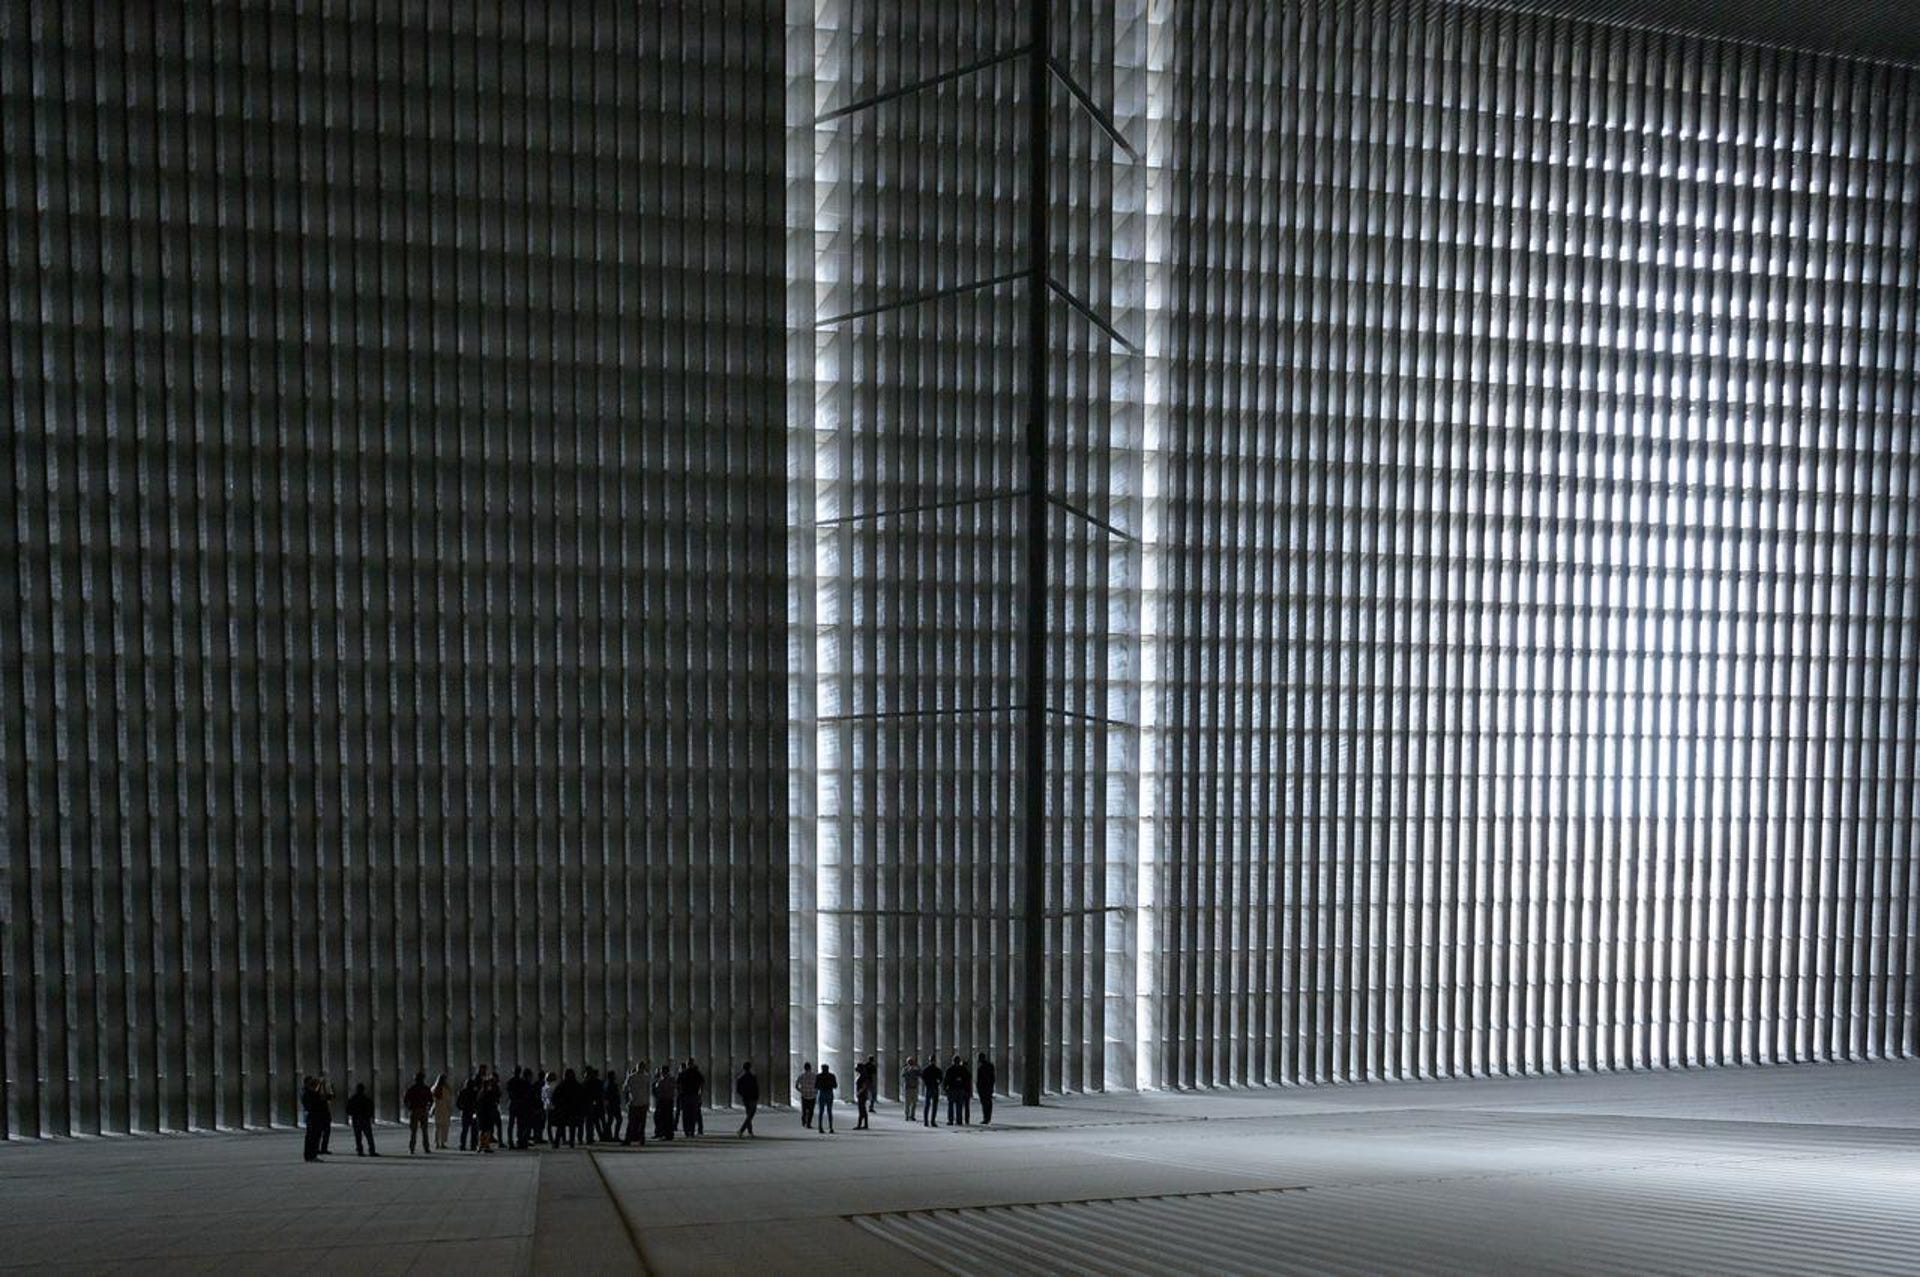 A group of people look tiny inside a wind tunnel facility with tall gray walls.